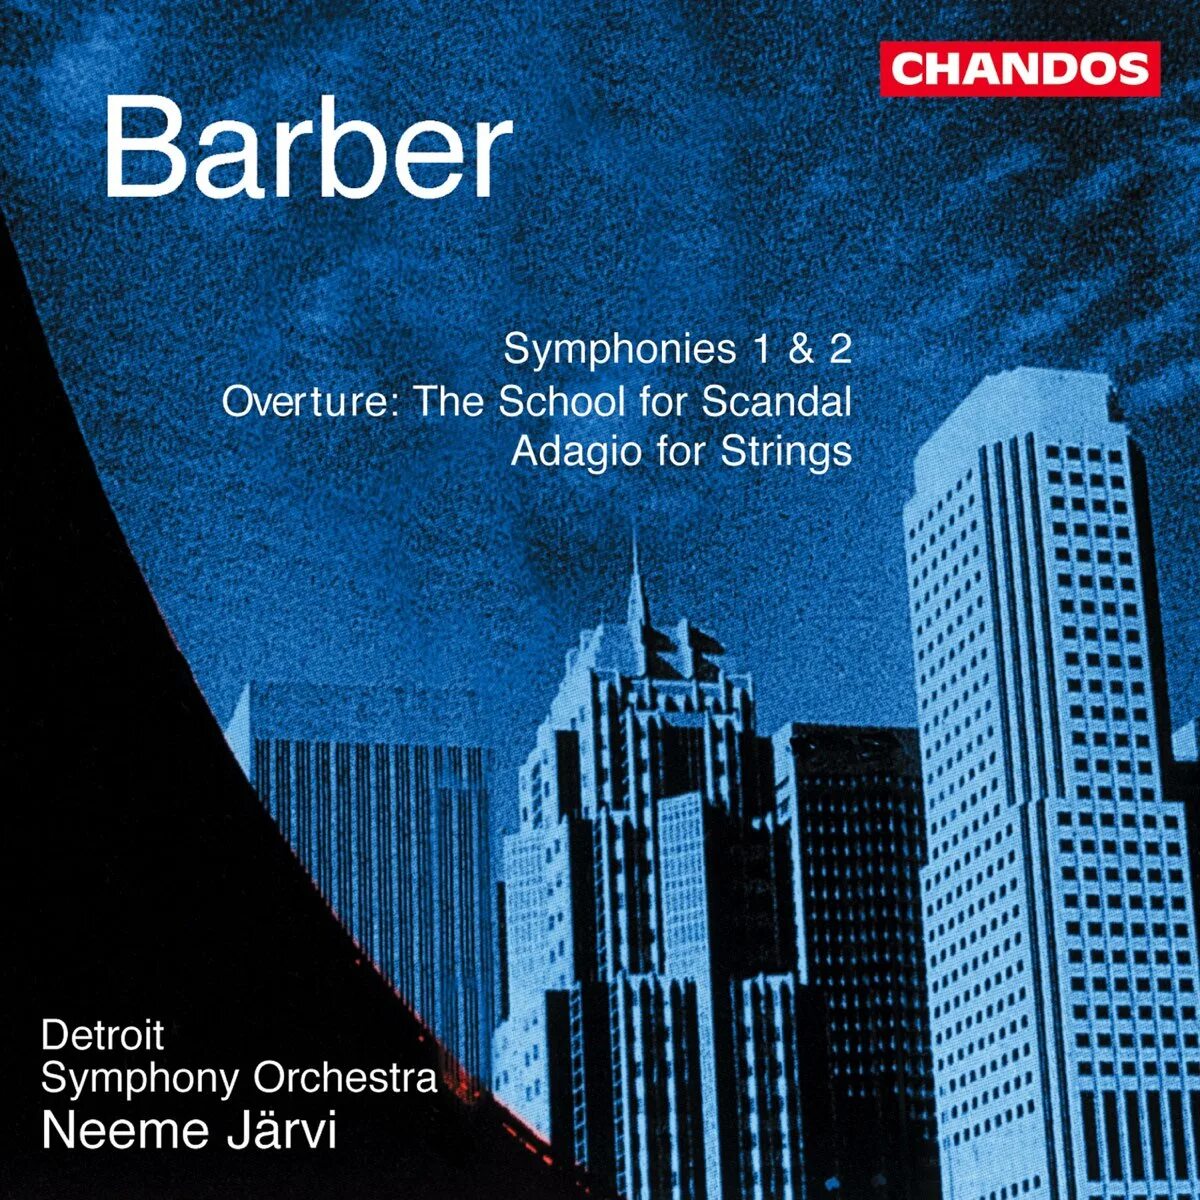 Samuel Barber. Adagio for Strings, op. 11 Samuel Barber. Samuel Barber CD Sony. Barber, Samuel - Symphonies nos 1 & 2 - essay for Orchestra - Overture to the School for scandal. Barber adagio